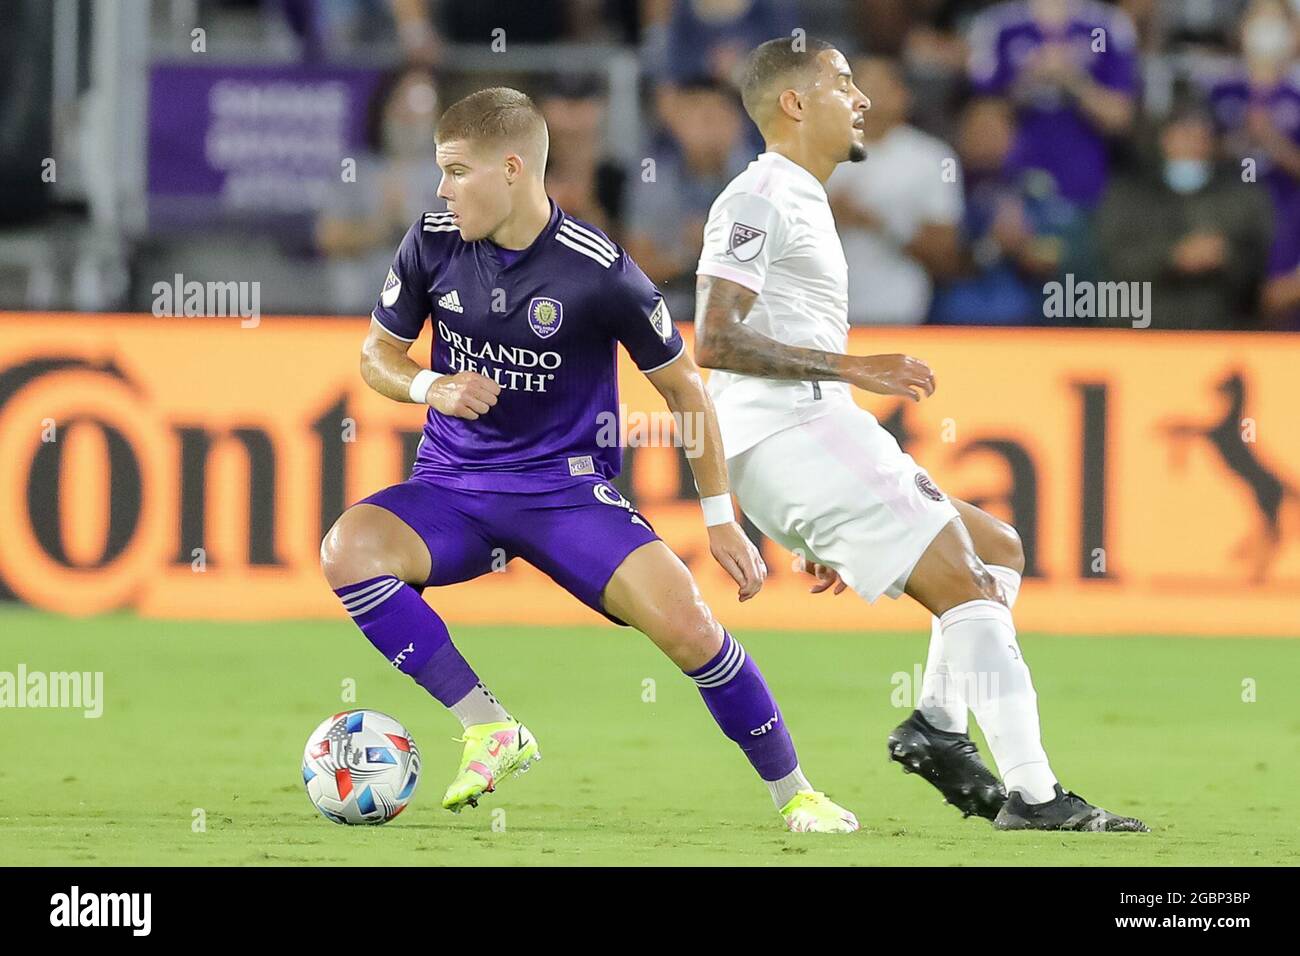 August 4, 2021: Orlando City forward CHRIS MUELLER (9) competes for the ball against Inter Miami midfielder GREGORE (26) during the MLS Orlando City vs Inter Miami soccer match at Exploria Stadium in Orlando, Fl on August 4, 2021. (Credit Image: © Cory Knowlton/ZUMA Press Wire) Stock Photo